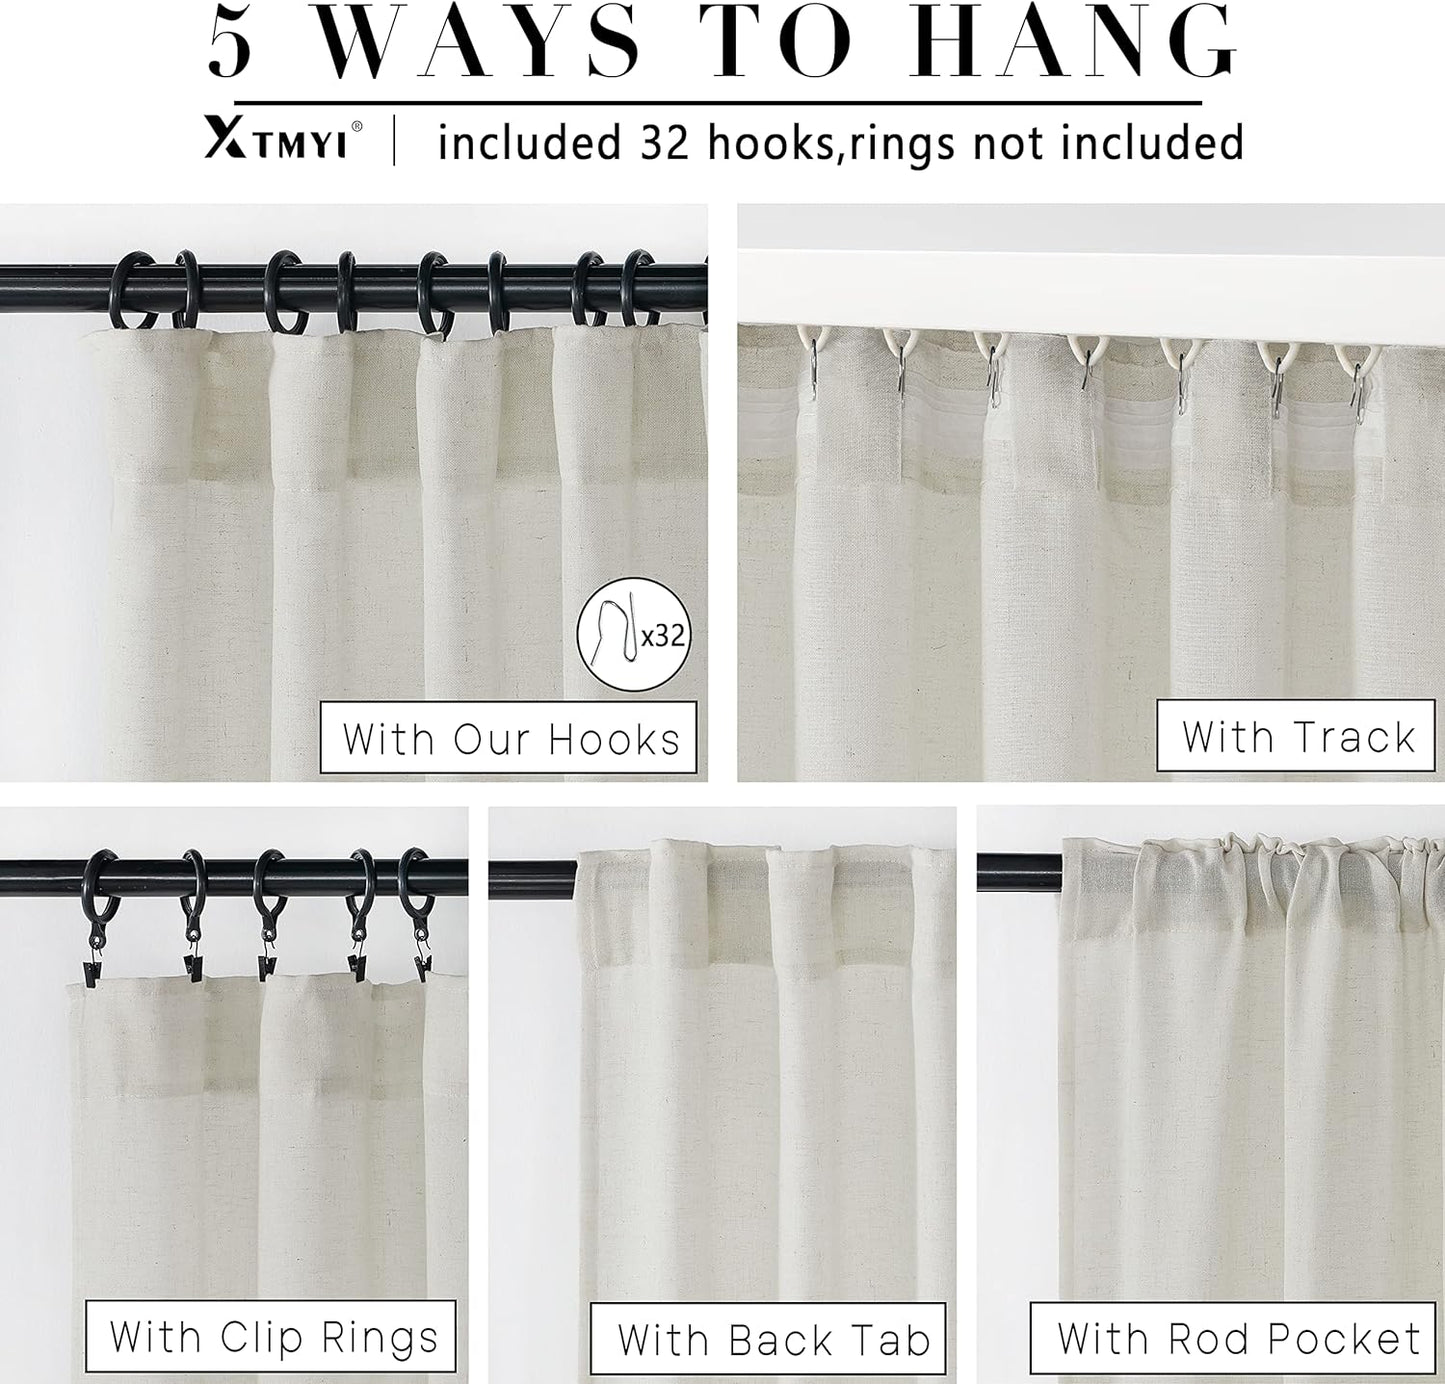 XTMYI Linen Cotton Farmhouse Curtains for Living Room Bedroom 84 Inches Long Two Sheer Hook Belt Pleated Back Tab Birch off White Ivory Neutral Boho Sour Cream Curtain Drapes 84 Length 2 Panels Set  XTMYI   